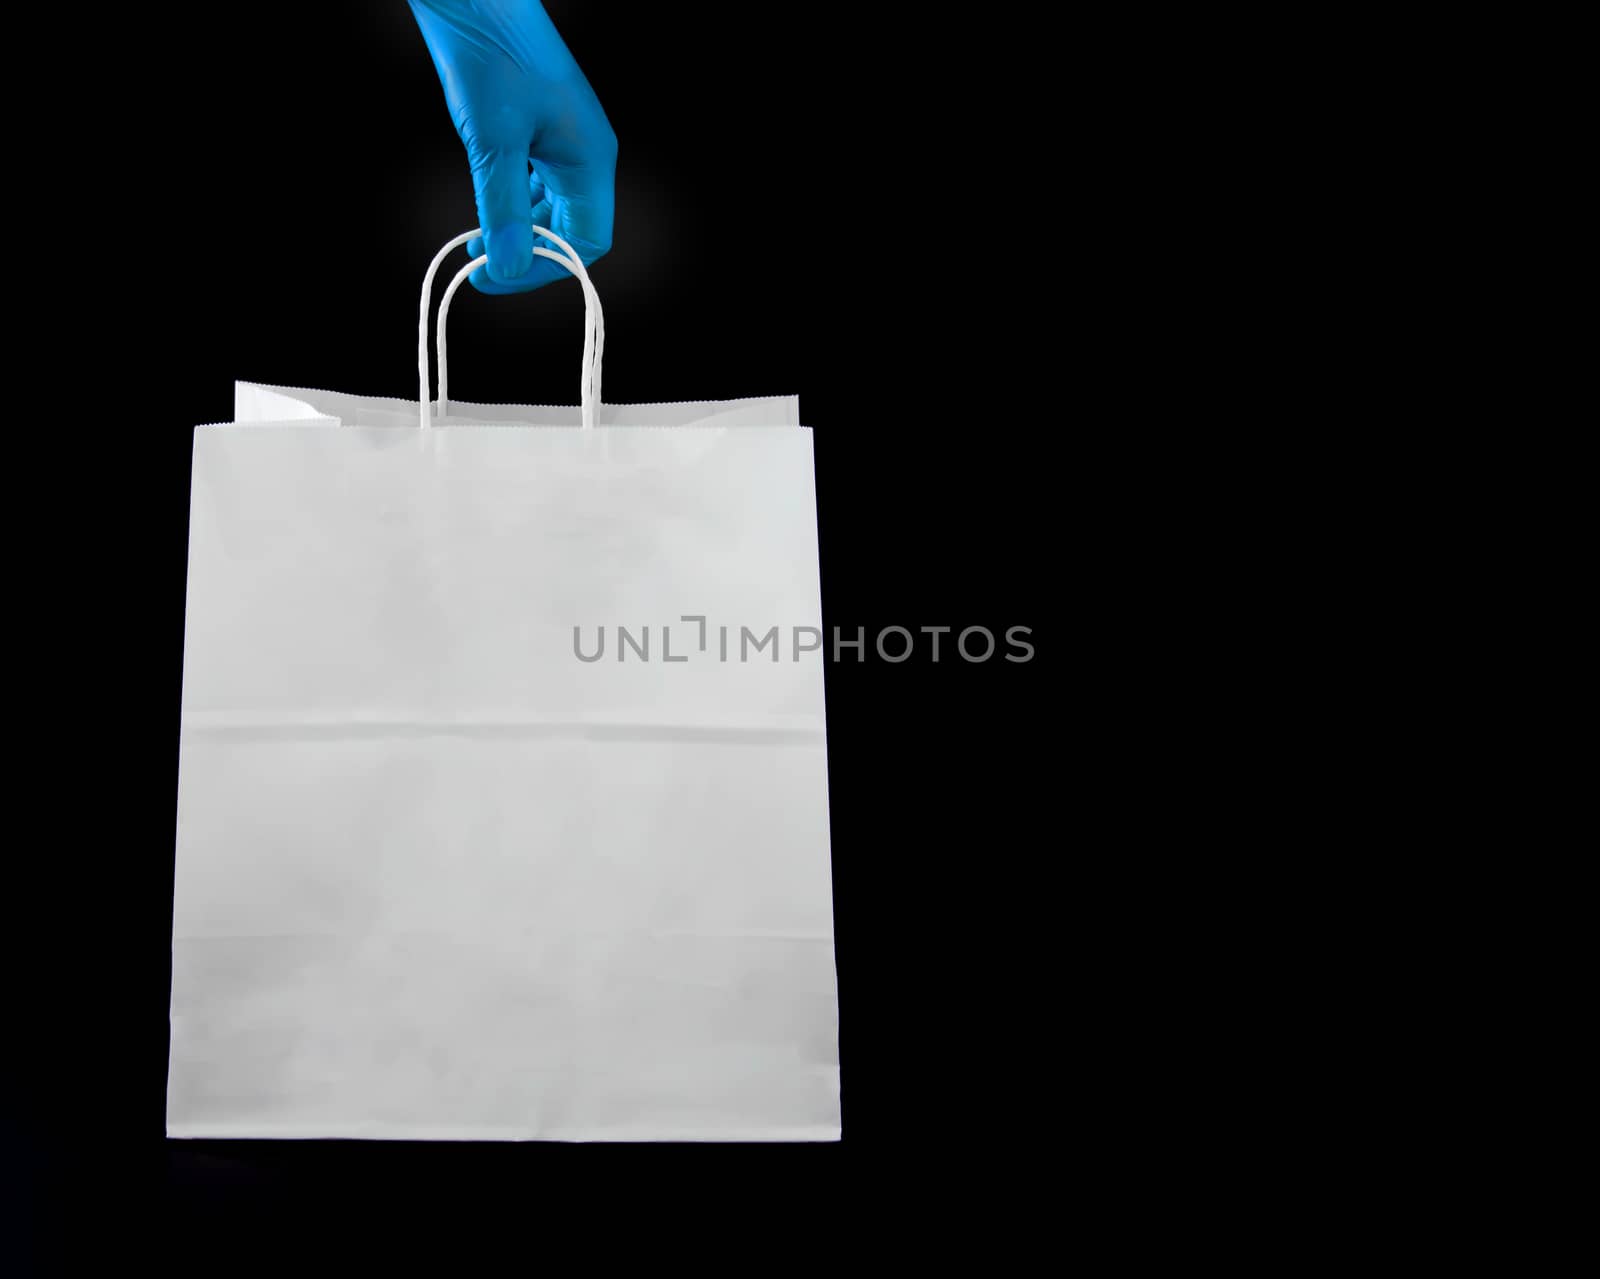 A person wearing protective latex gloves holding a shopping paper bag by oasisamuel